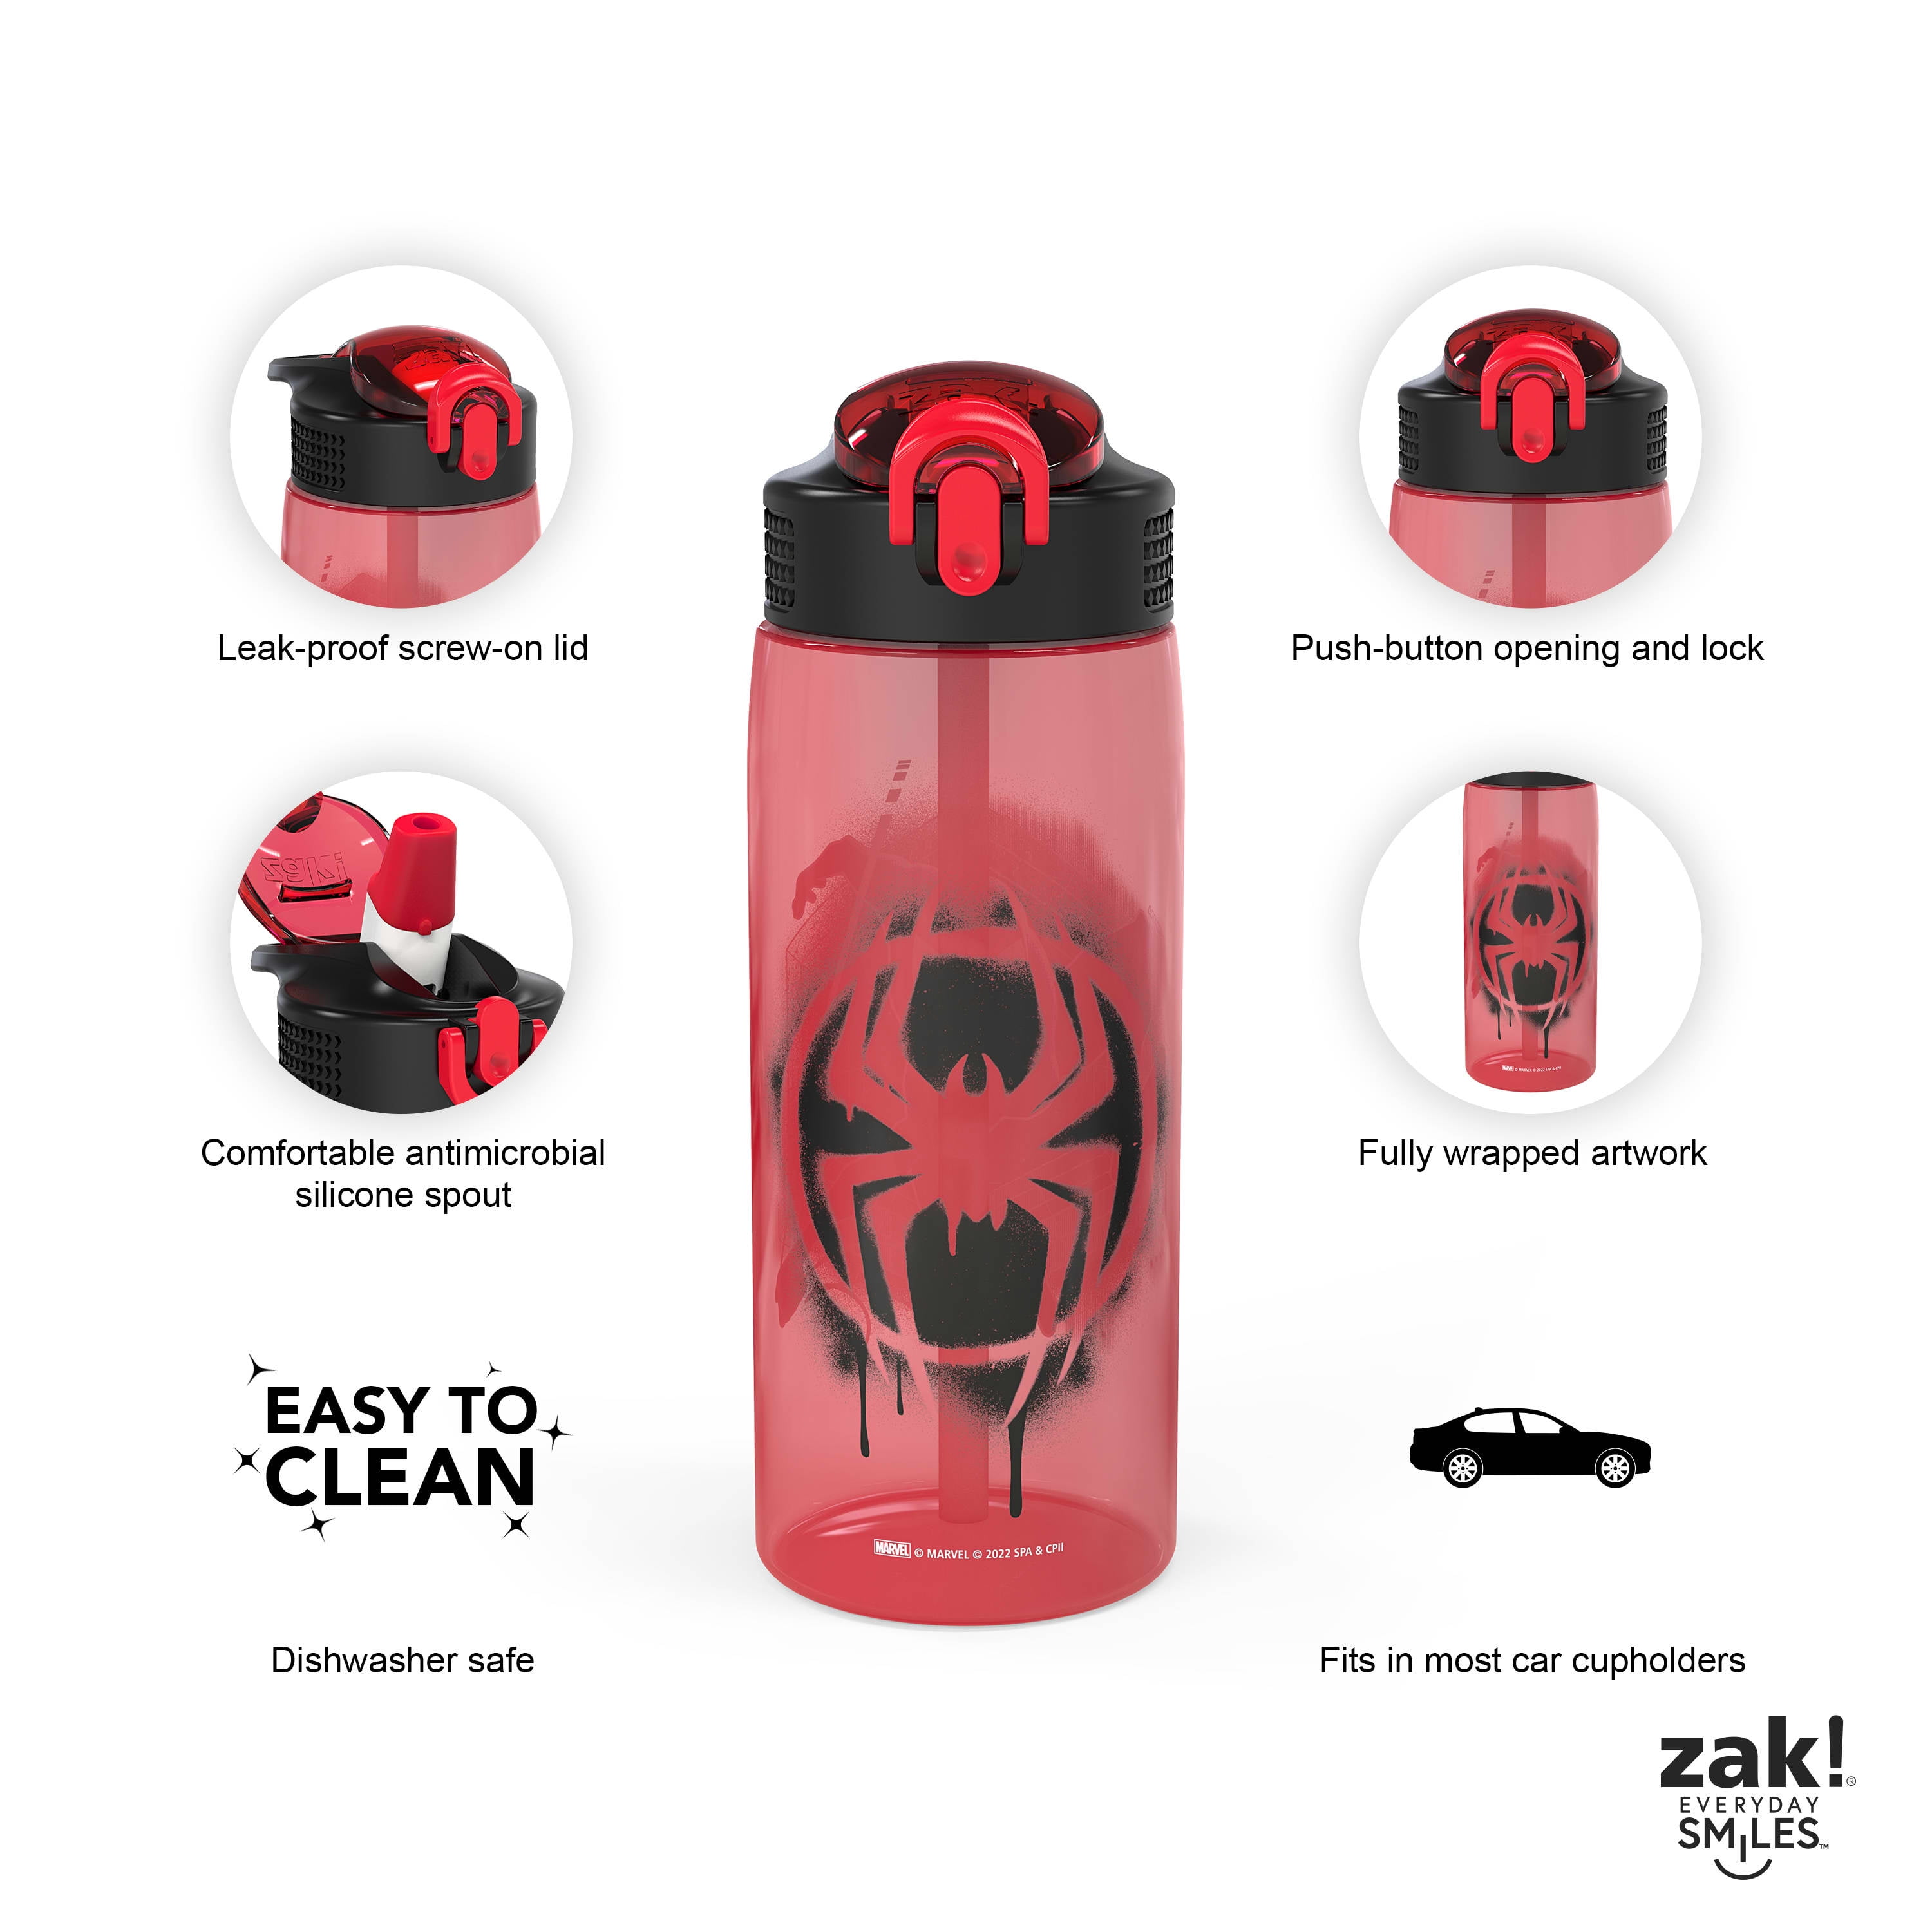  Zak Designs Marvel Spider-Man Water Bottle for Travel and At  Home, 19 oz Vacuum Insulated Stainless Steel with Locking Spout Cover,  Built-In Carrying Loop, Leak-Proof Design (Miles Morales): Home & Kitchen